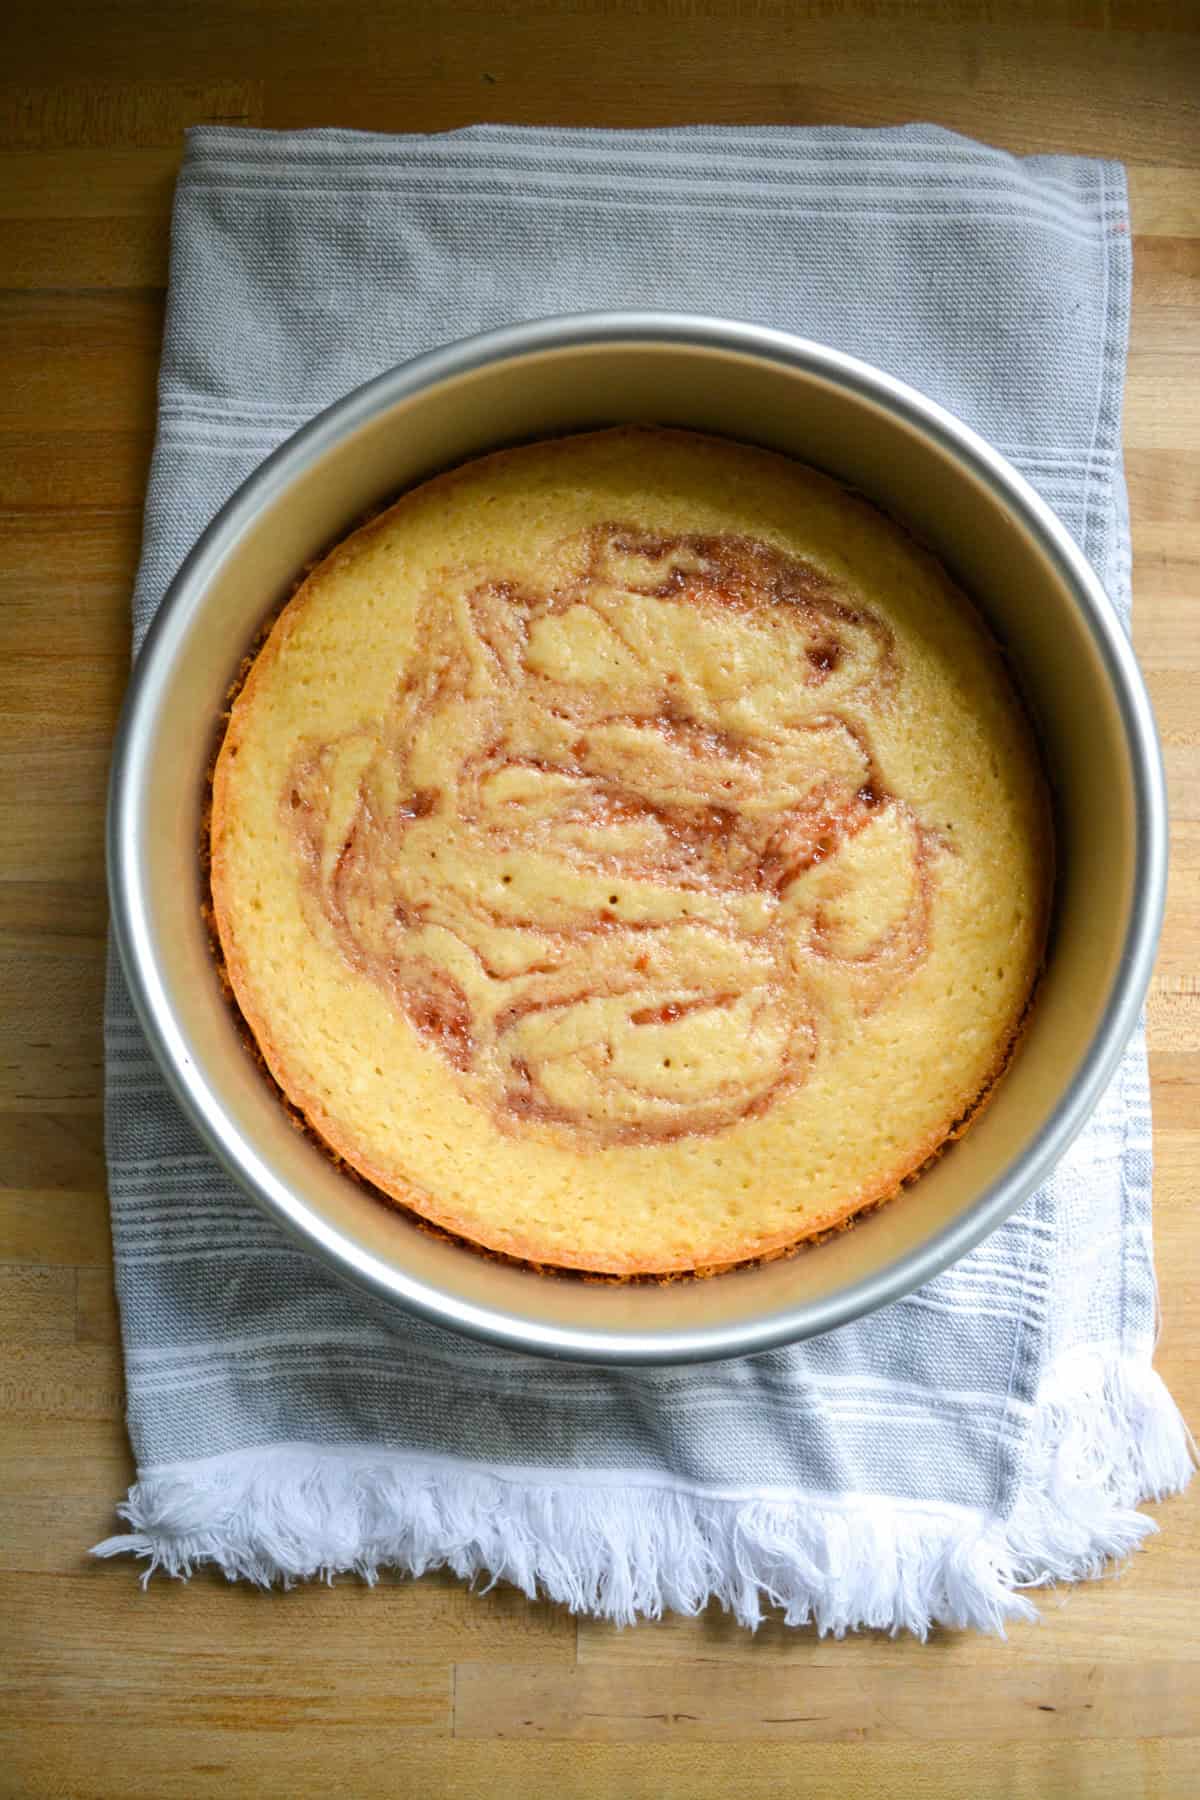 Baked cake in a round cake pan with strawberry preserves swirled into the top.